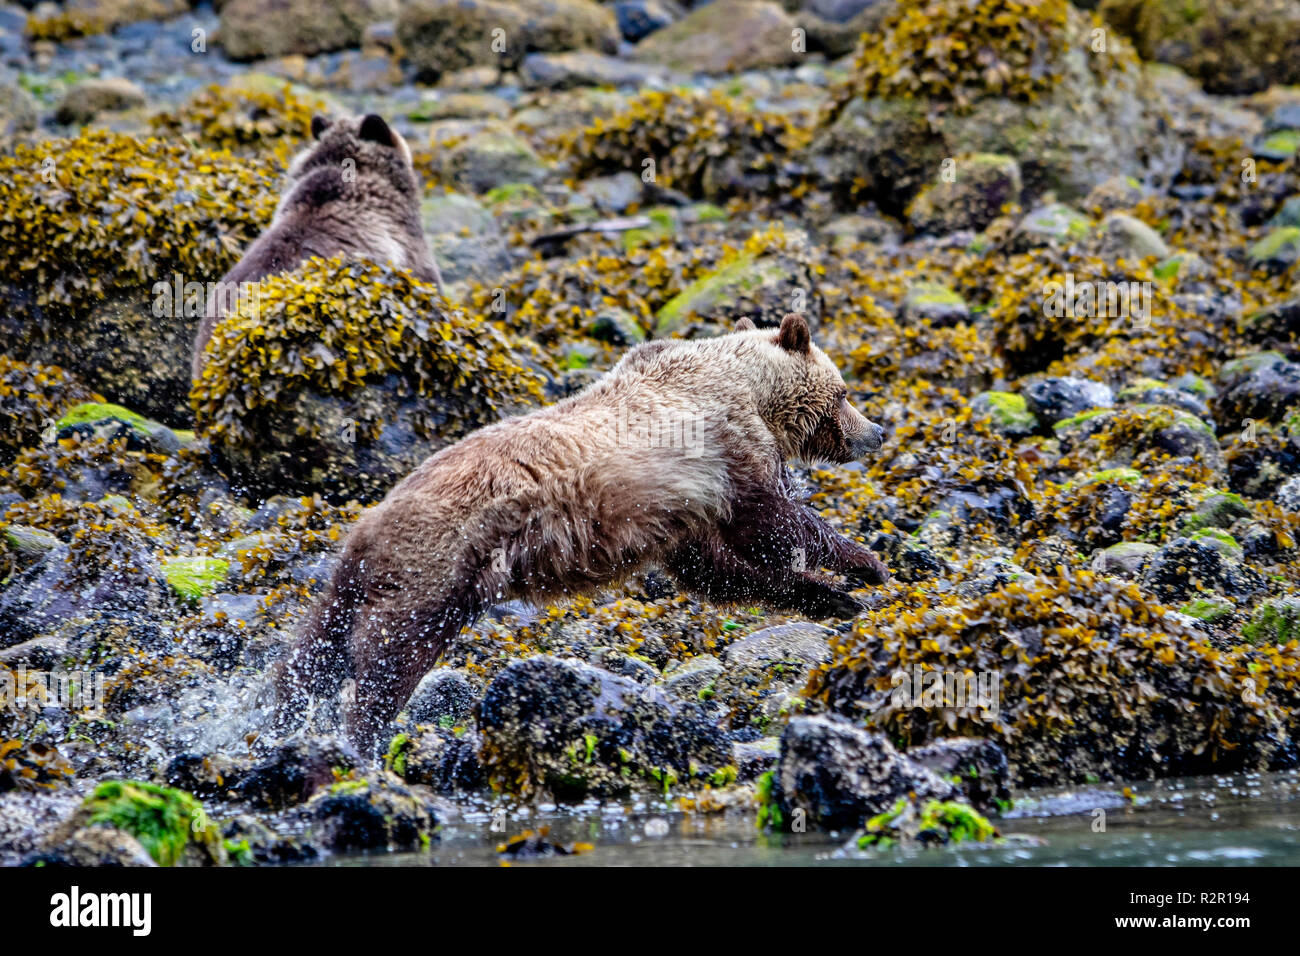 Grizzly bear (Ursus arctos) in Knight Inlet, First Nations Territory, British Columbia, Canada Stock Photo